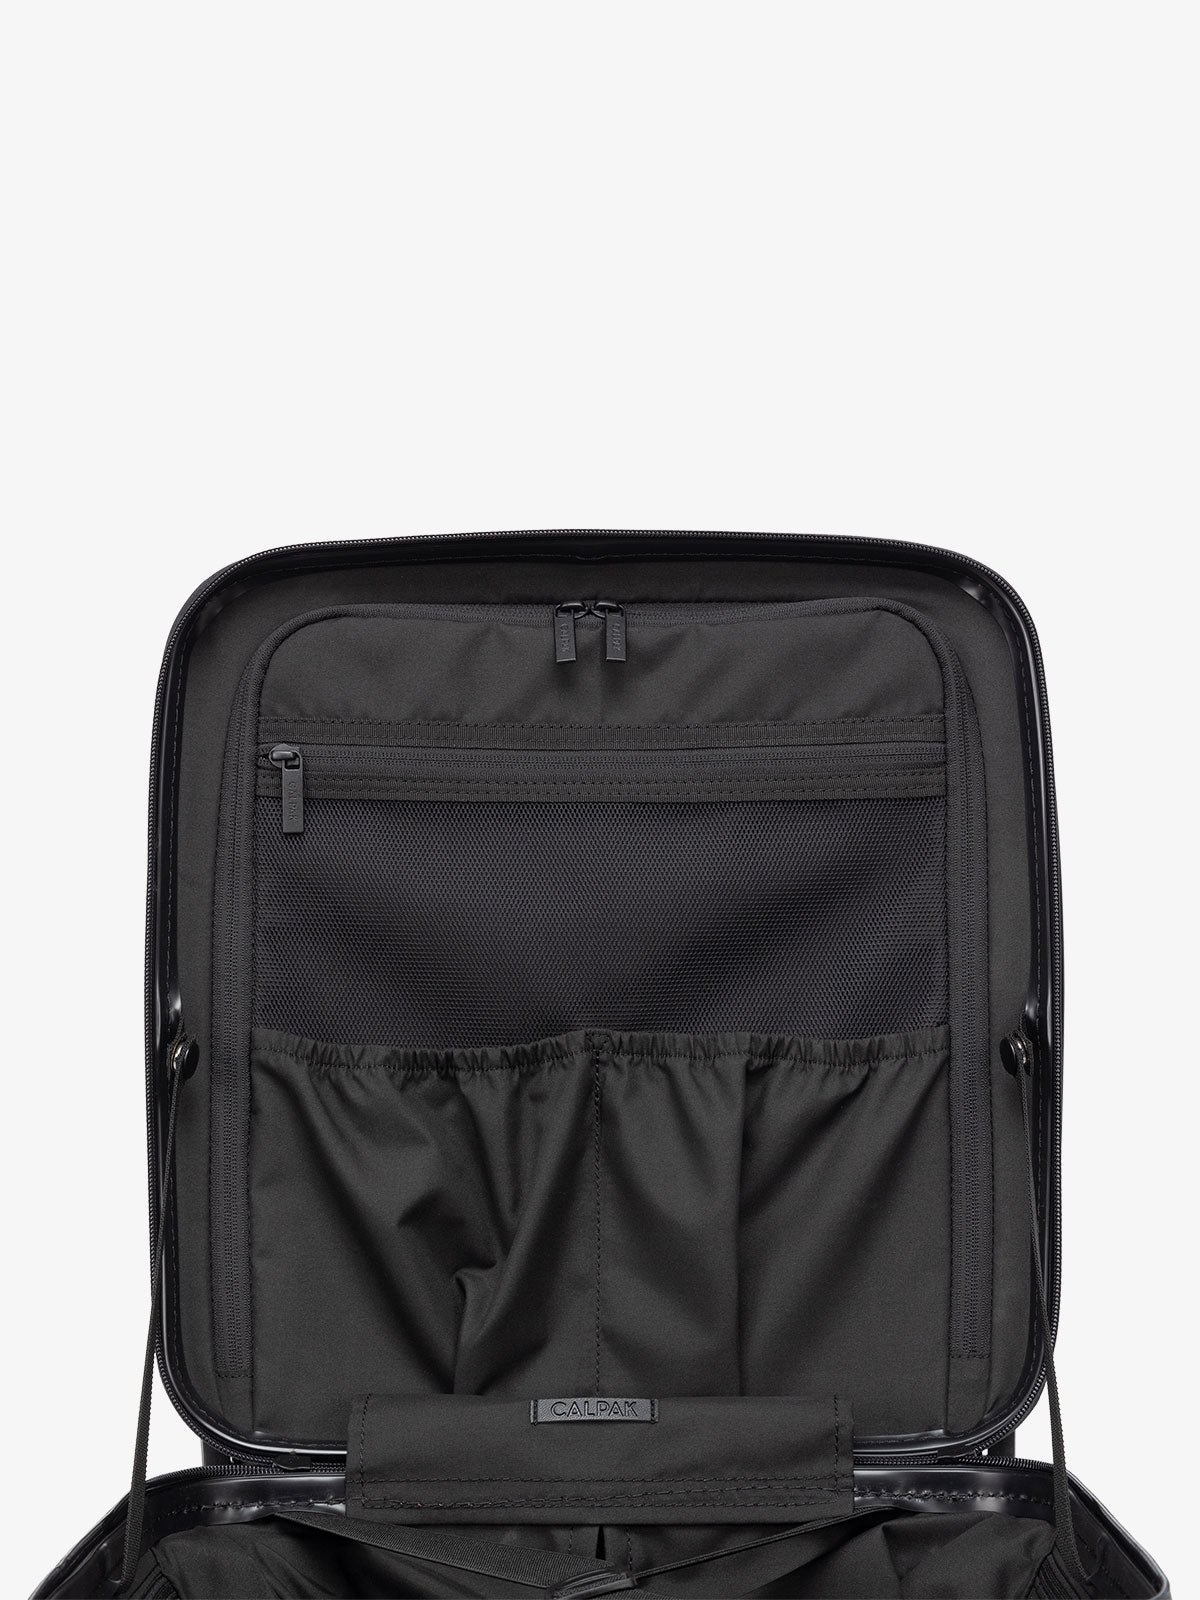 Hue mini carry on rolling luggage with multiple pockets